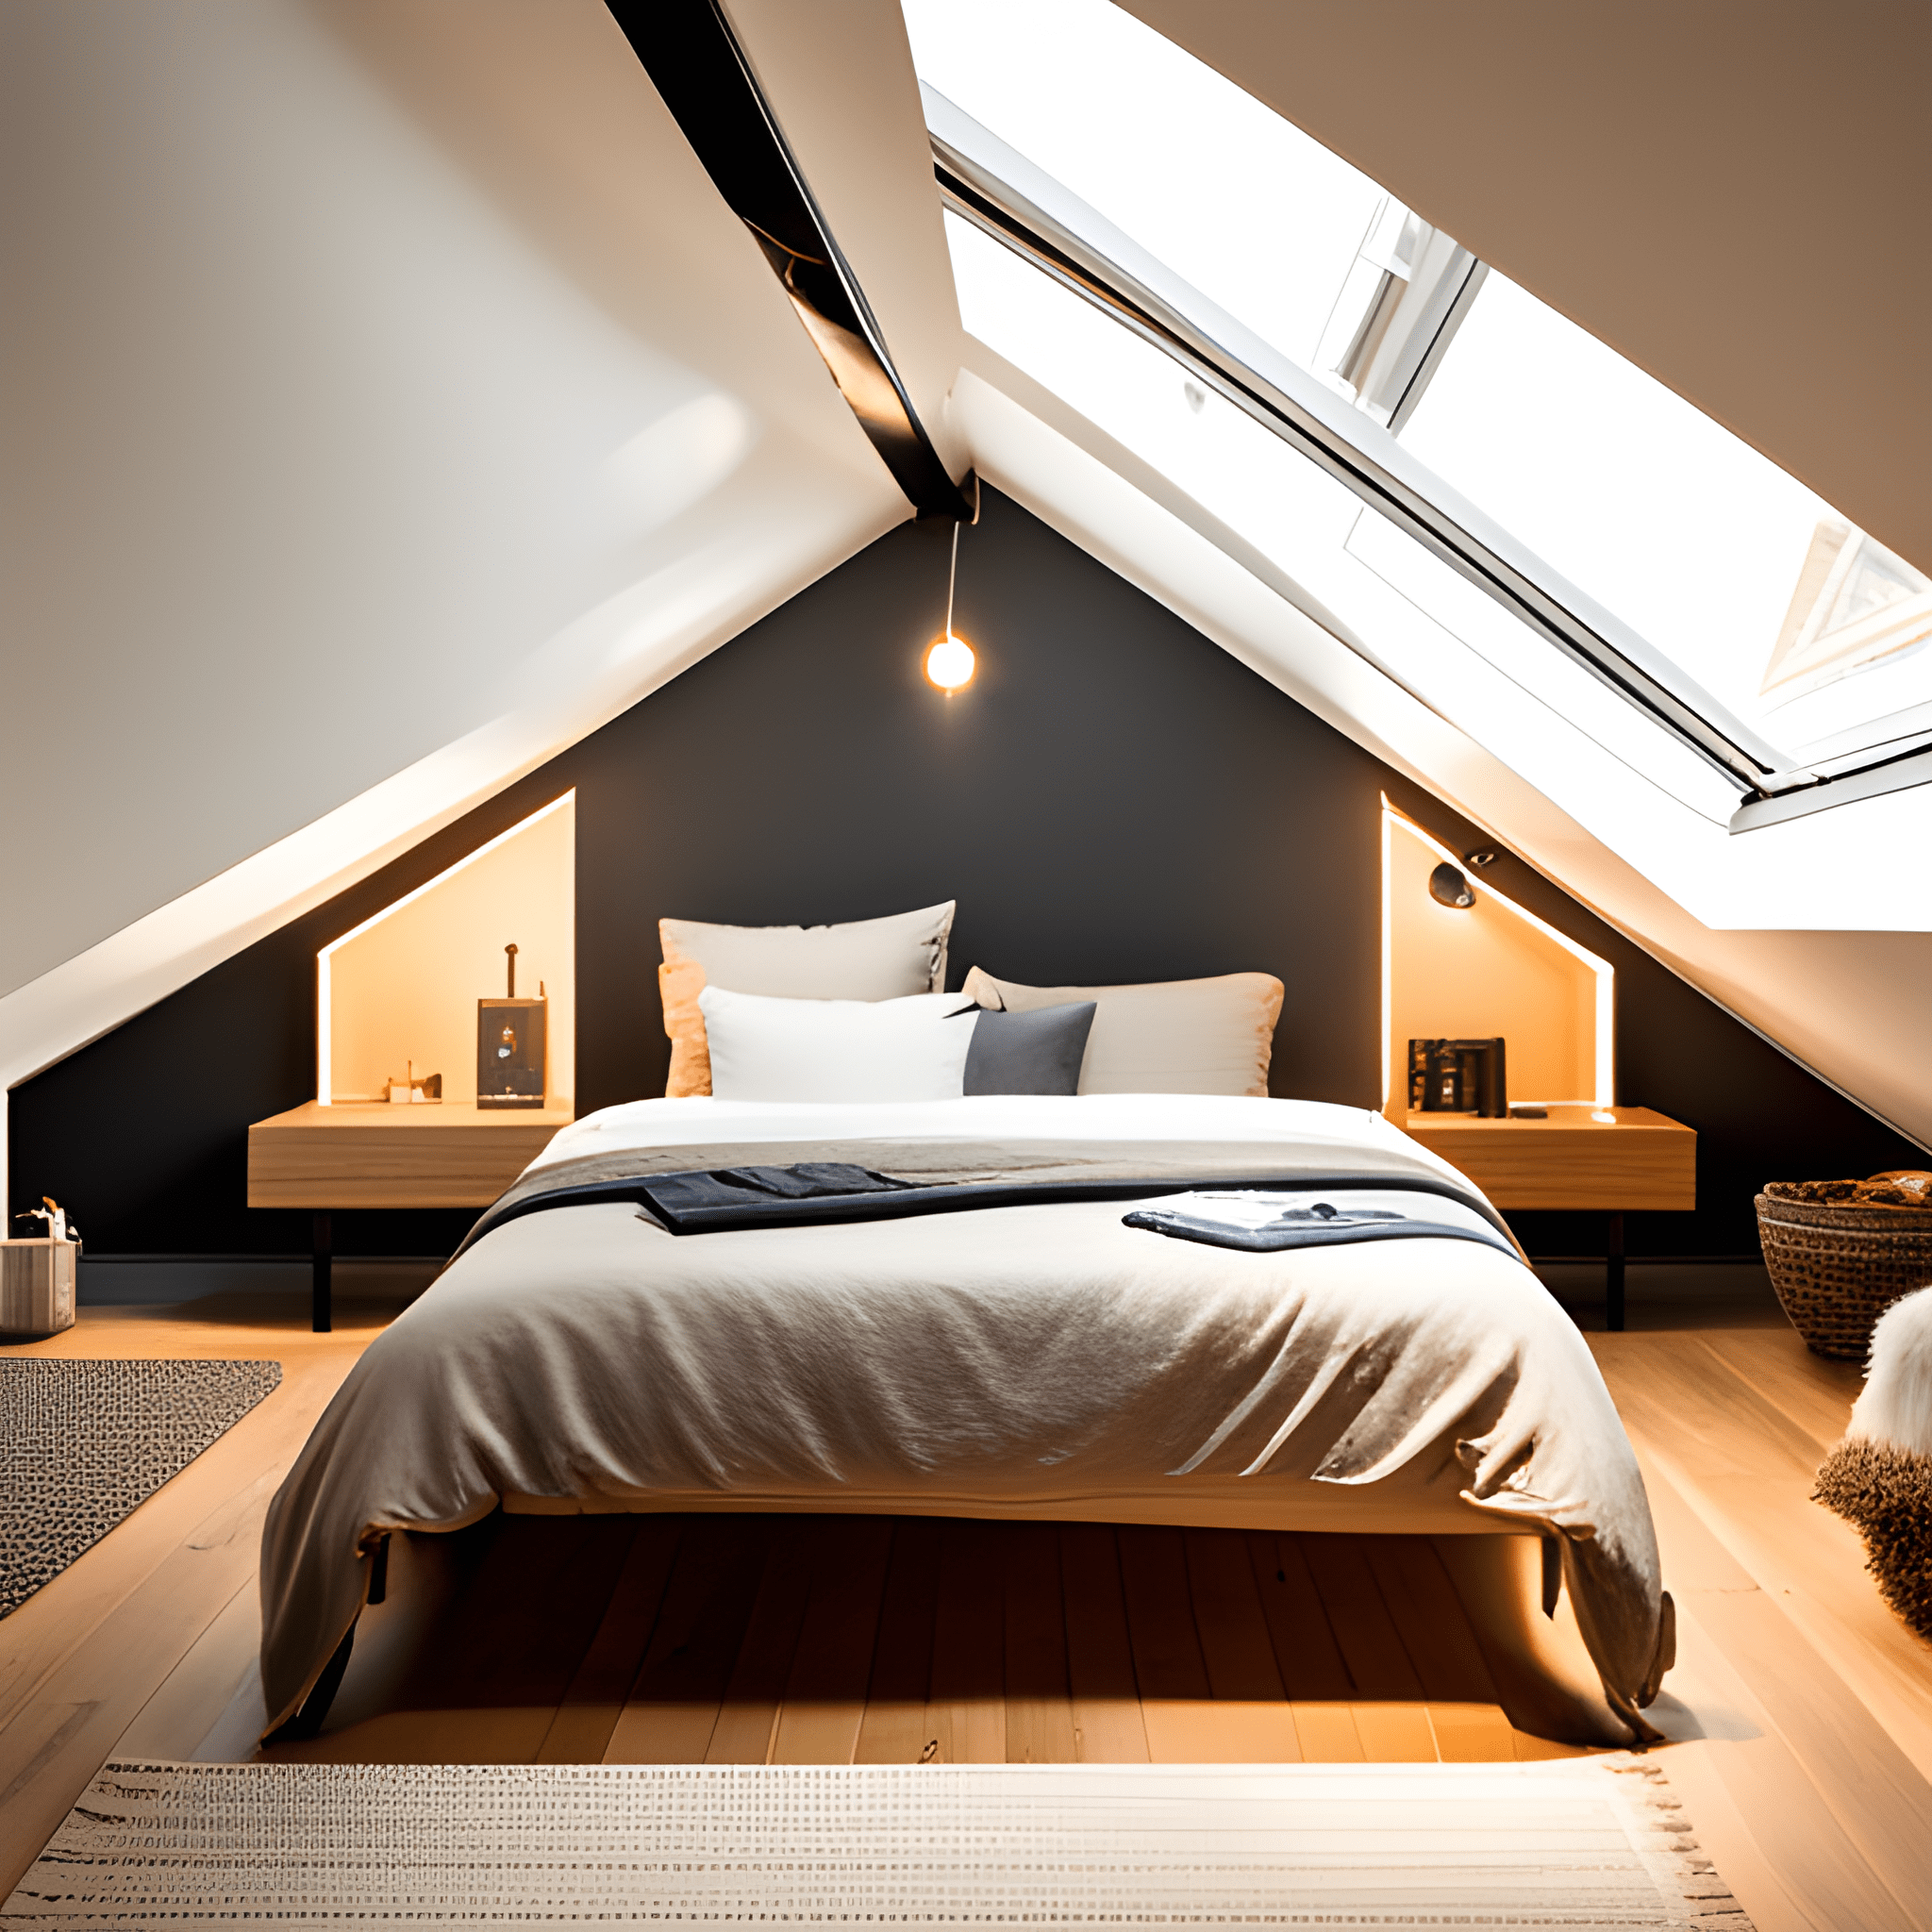 An-image-showcasing-a-serene-and-inviting-bedroom-in-an-attic-space--complete-with-a-comfortable-bed--soft-lighting--cozy-textiles--and-decorative-accents-that-create-a-tranquil-ambiance---